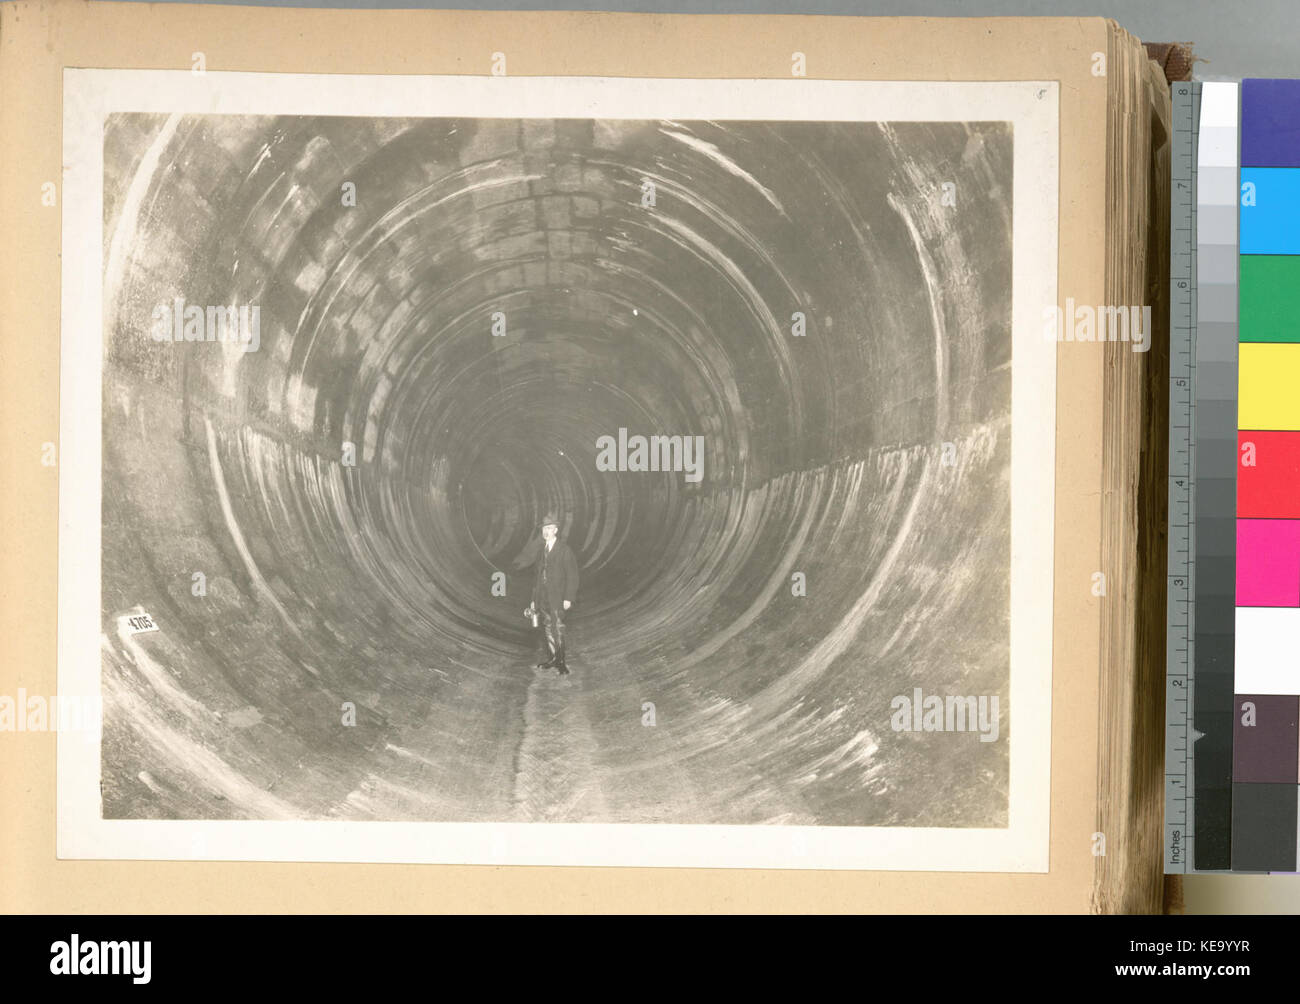 Yonkers pressure tunnel. Completed section of standard circular type of tunnel 16 feet 7 inches in diameter. Station marking tile on left. Contract 54. November 21, 1913 (NYPL b13814376 435484) Stock Photo